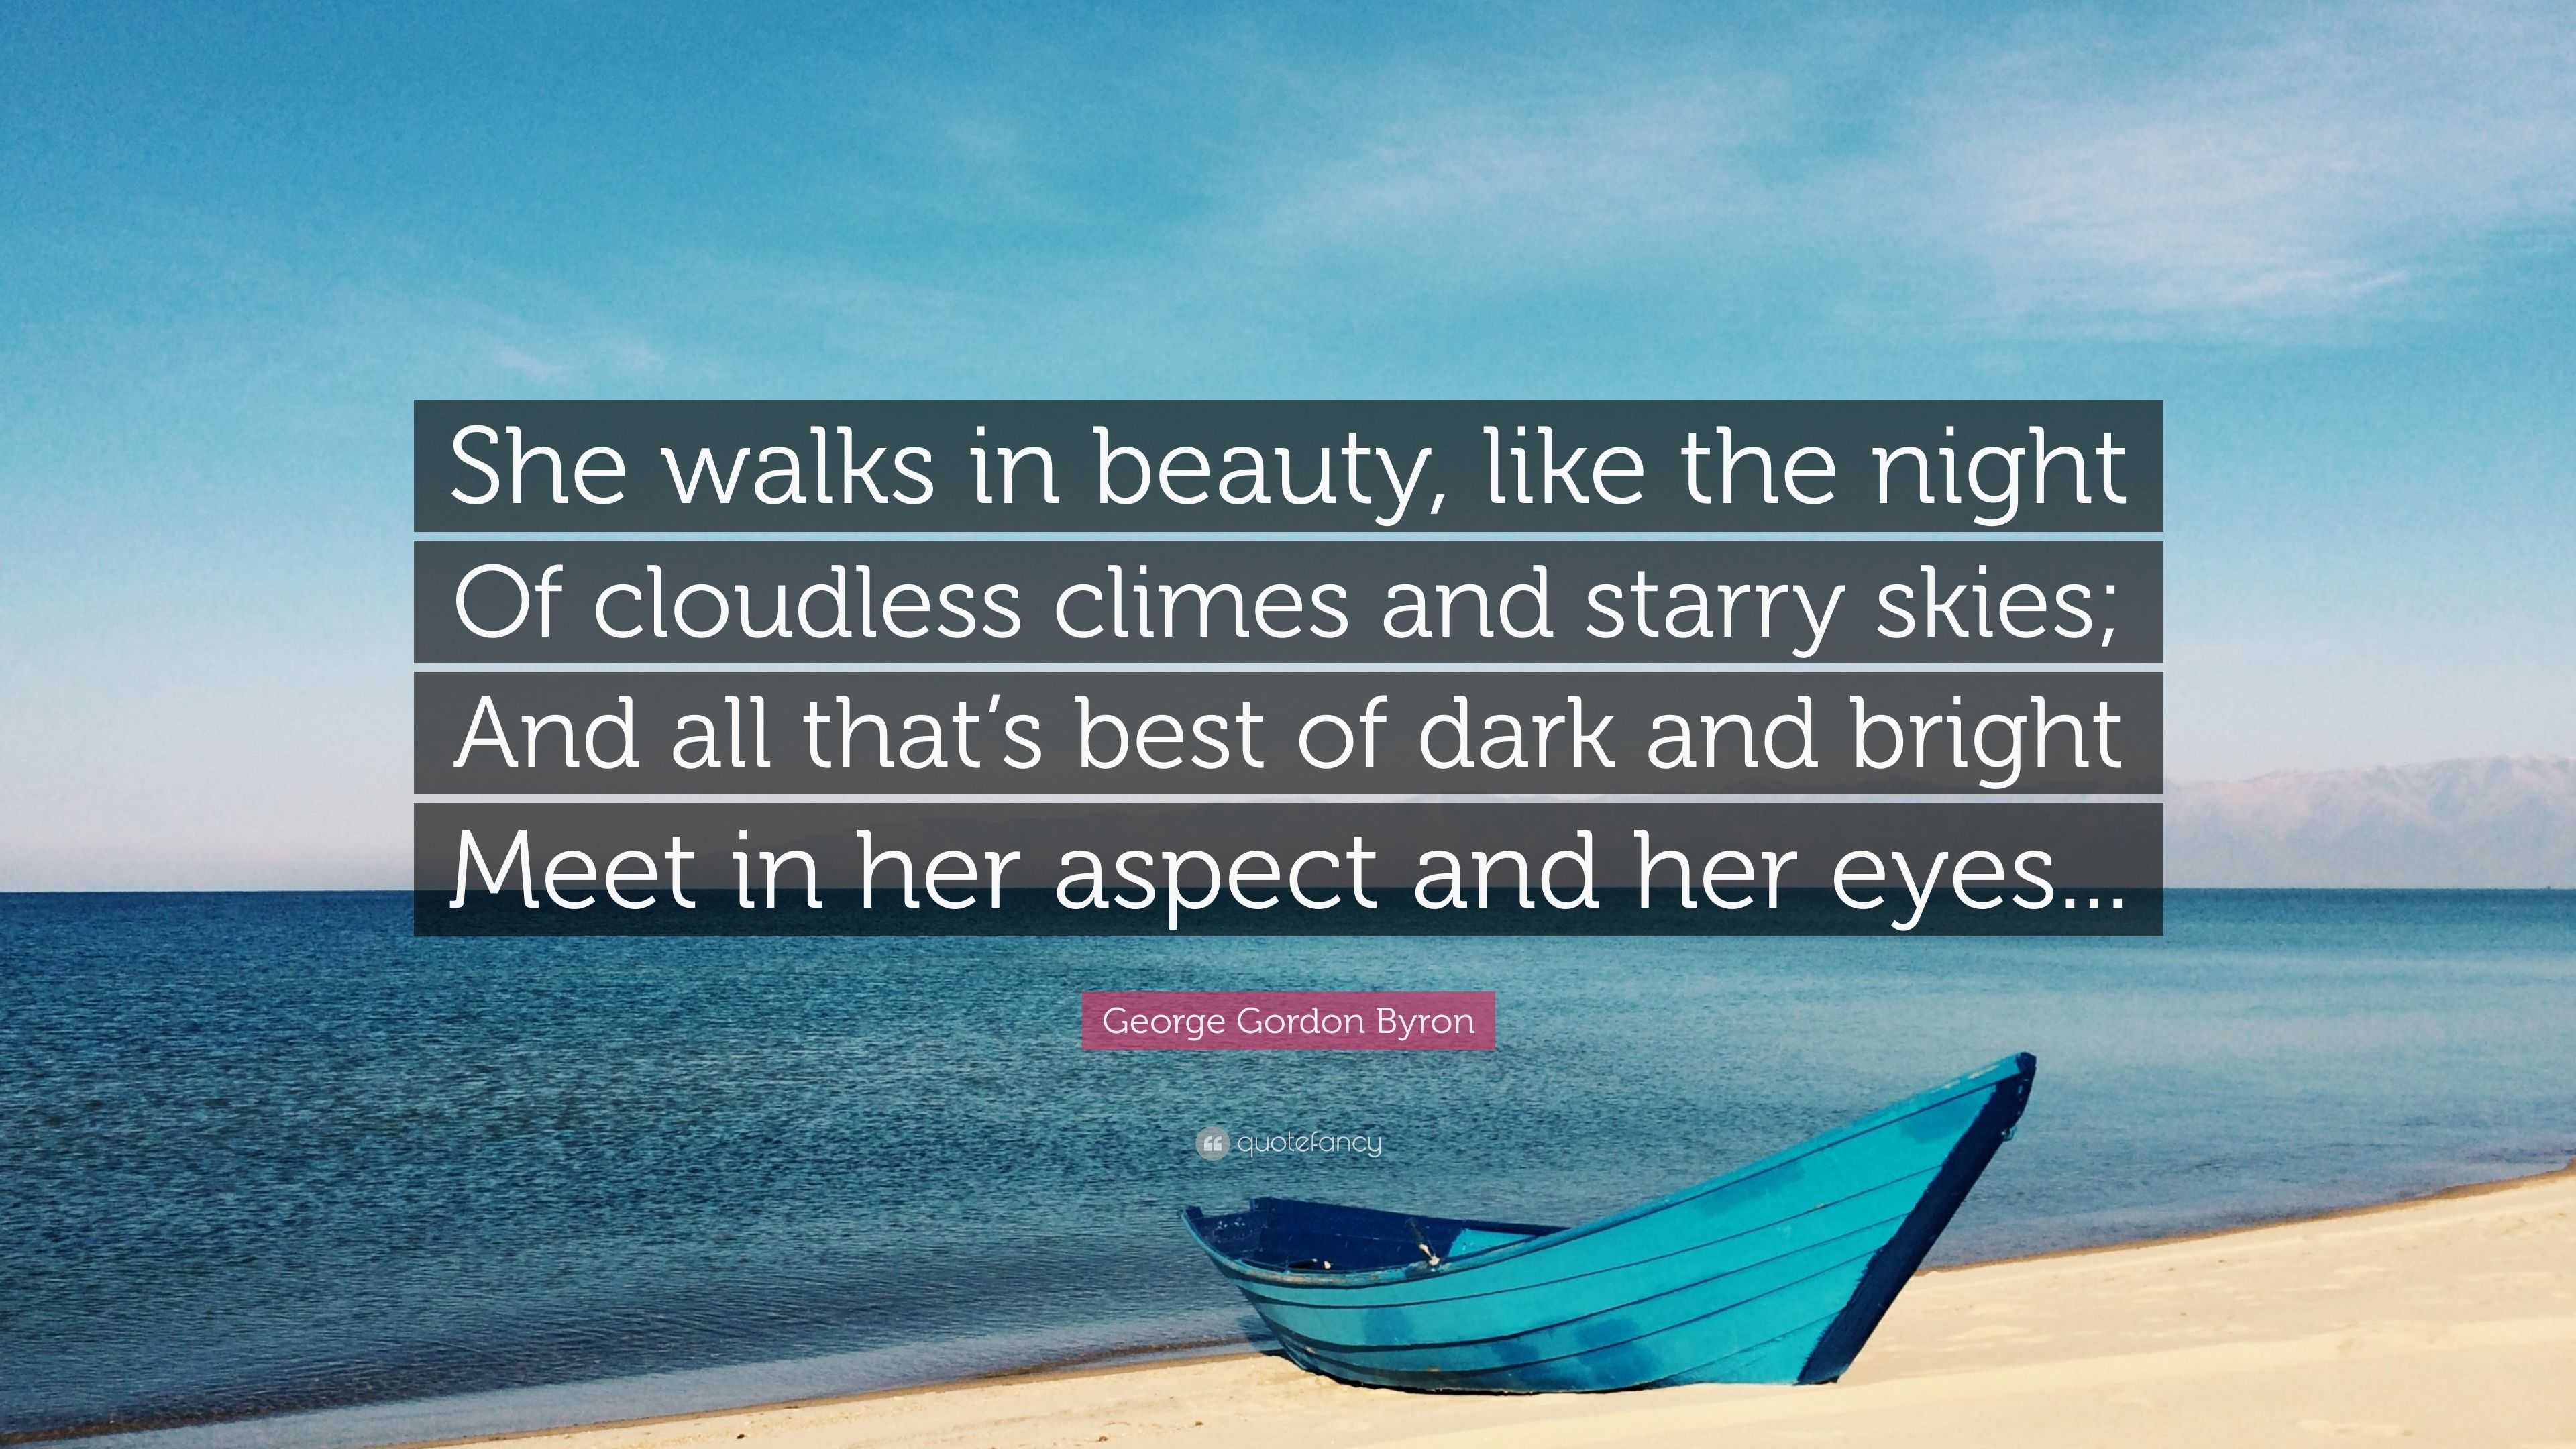 George Gordon Byron Quote: “She walks in beauty, like the night Of ...